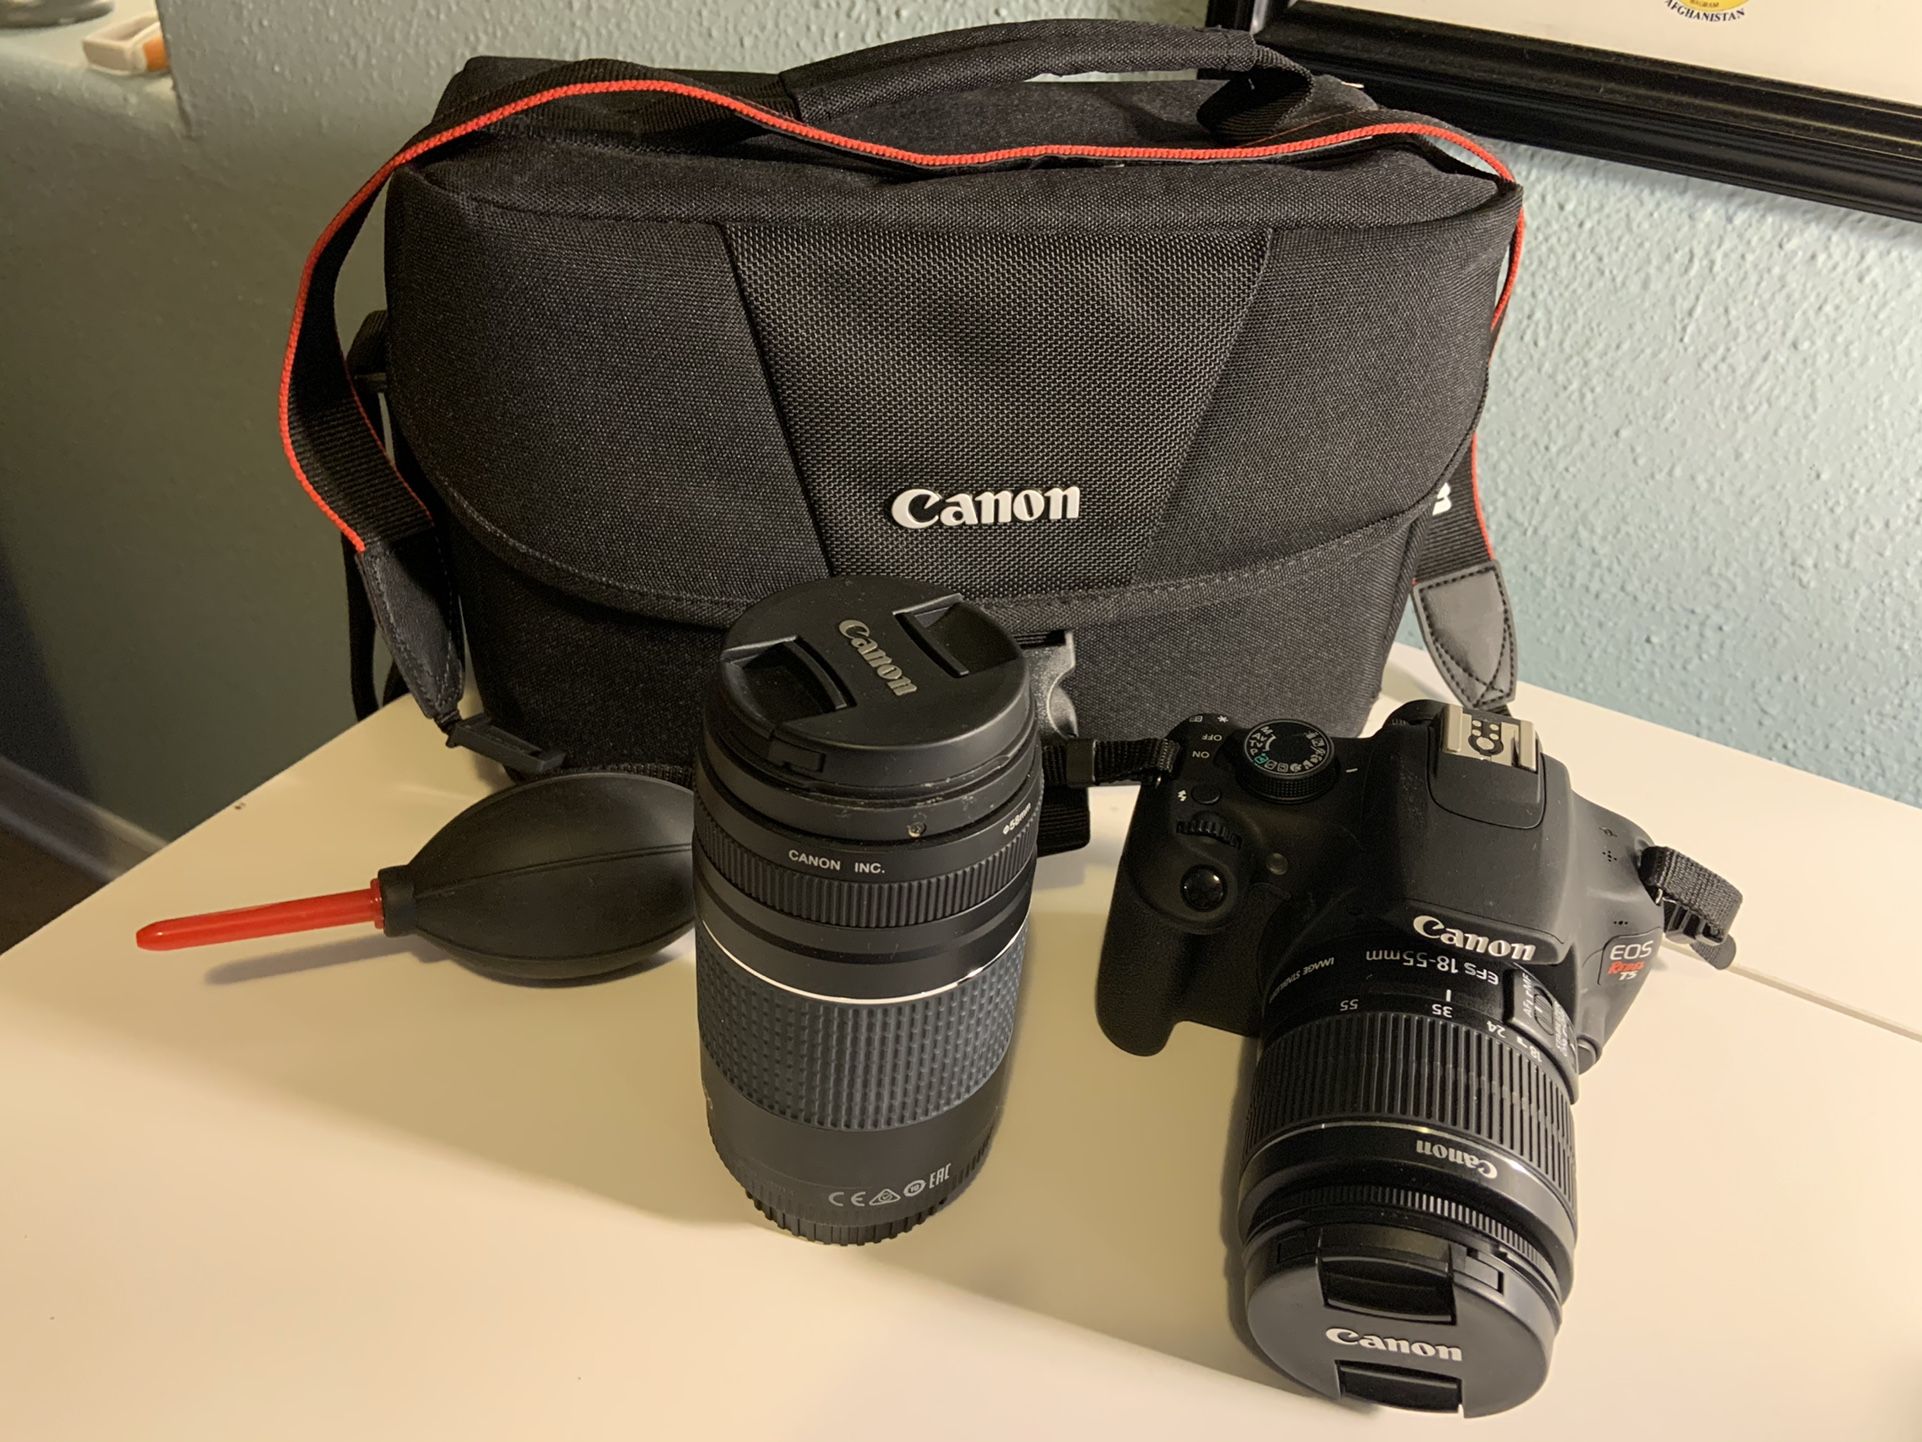 Cannon Rebel T5 With Extra Lenses And Bag